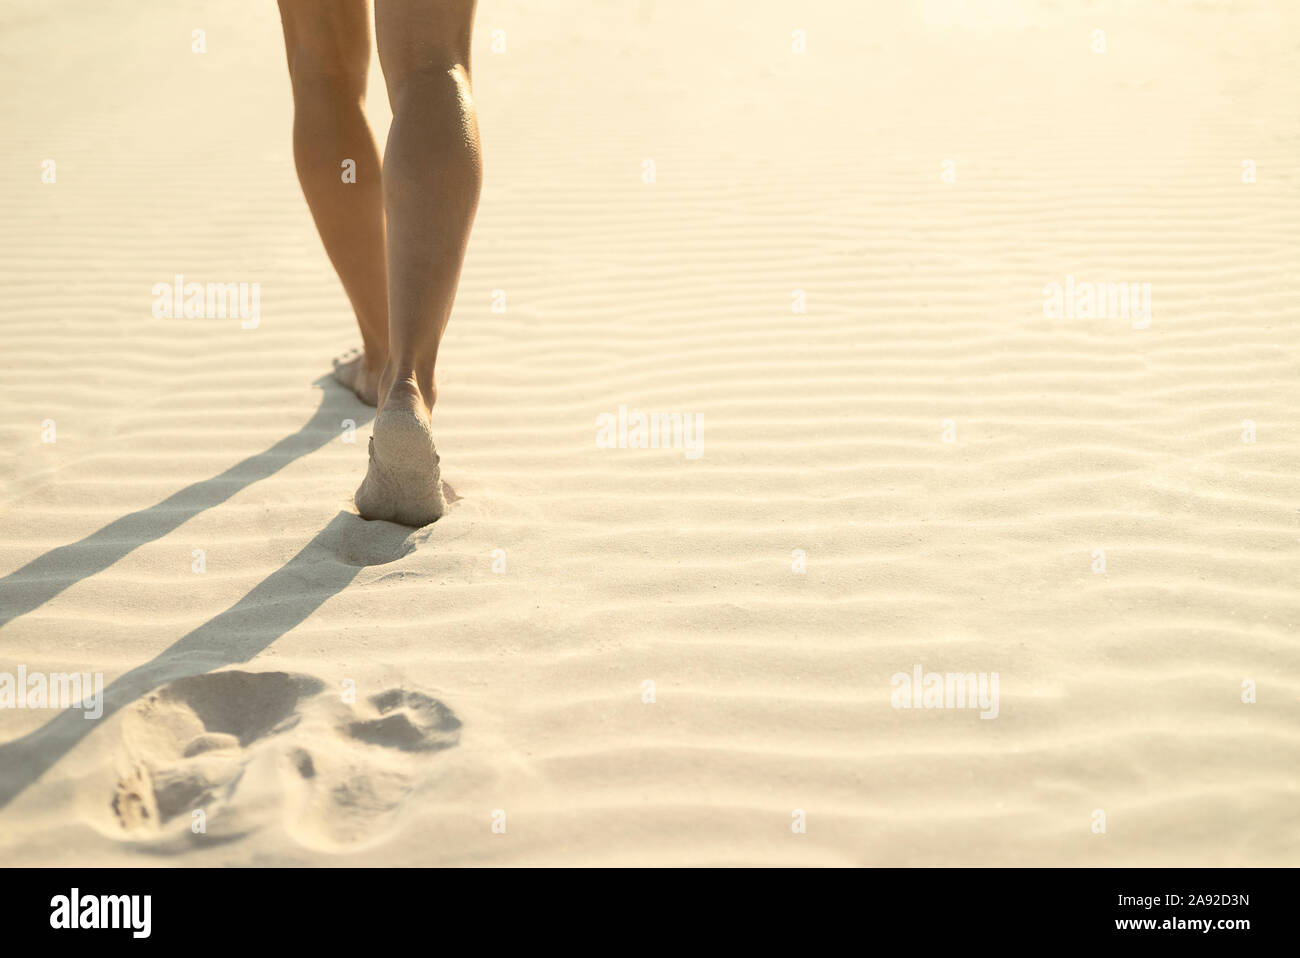 Woman walking on sand Banque D'Images